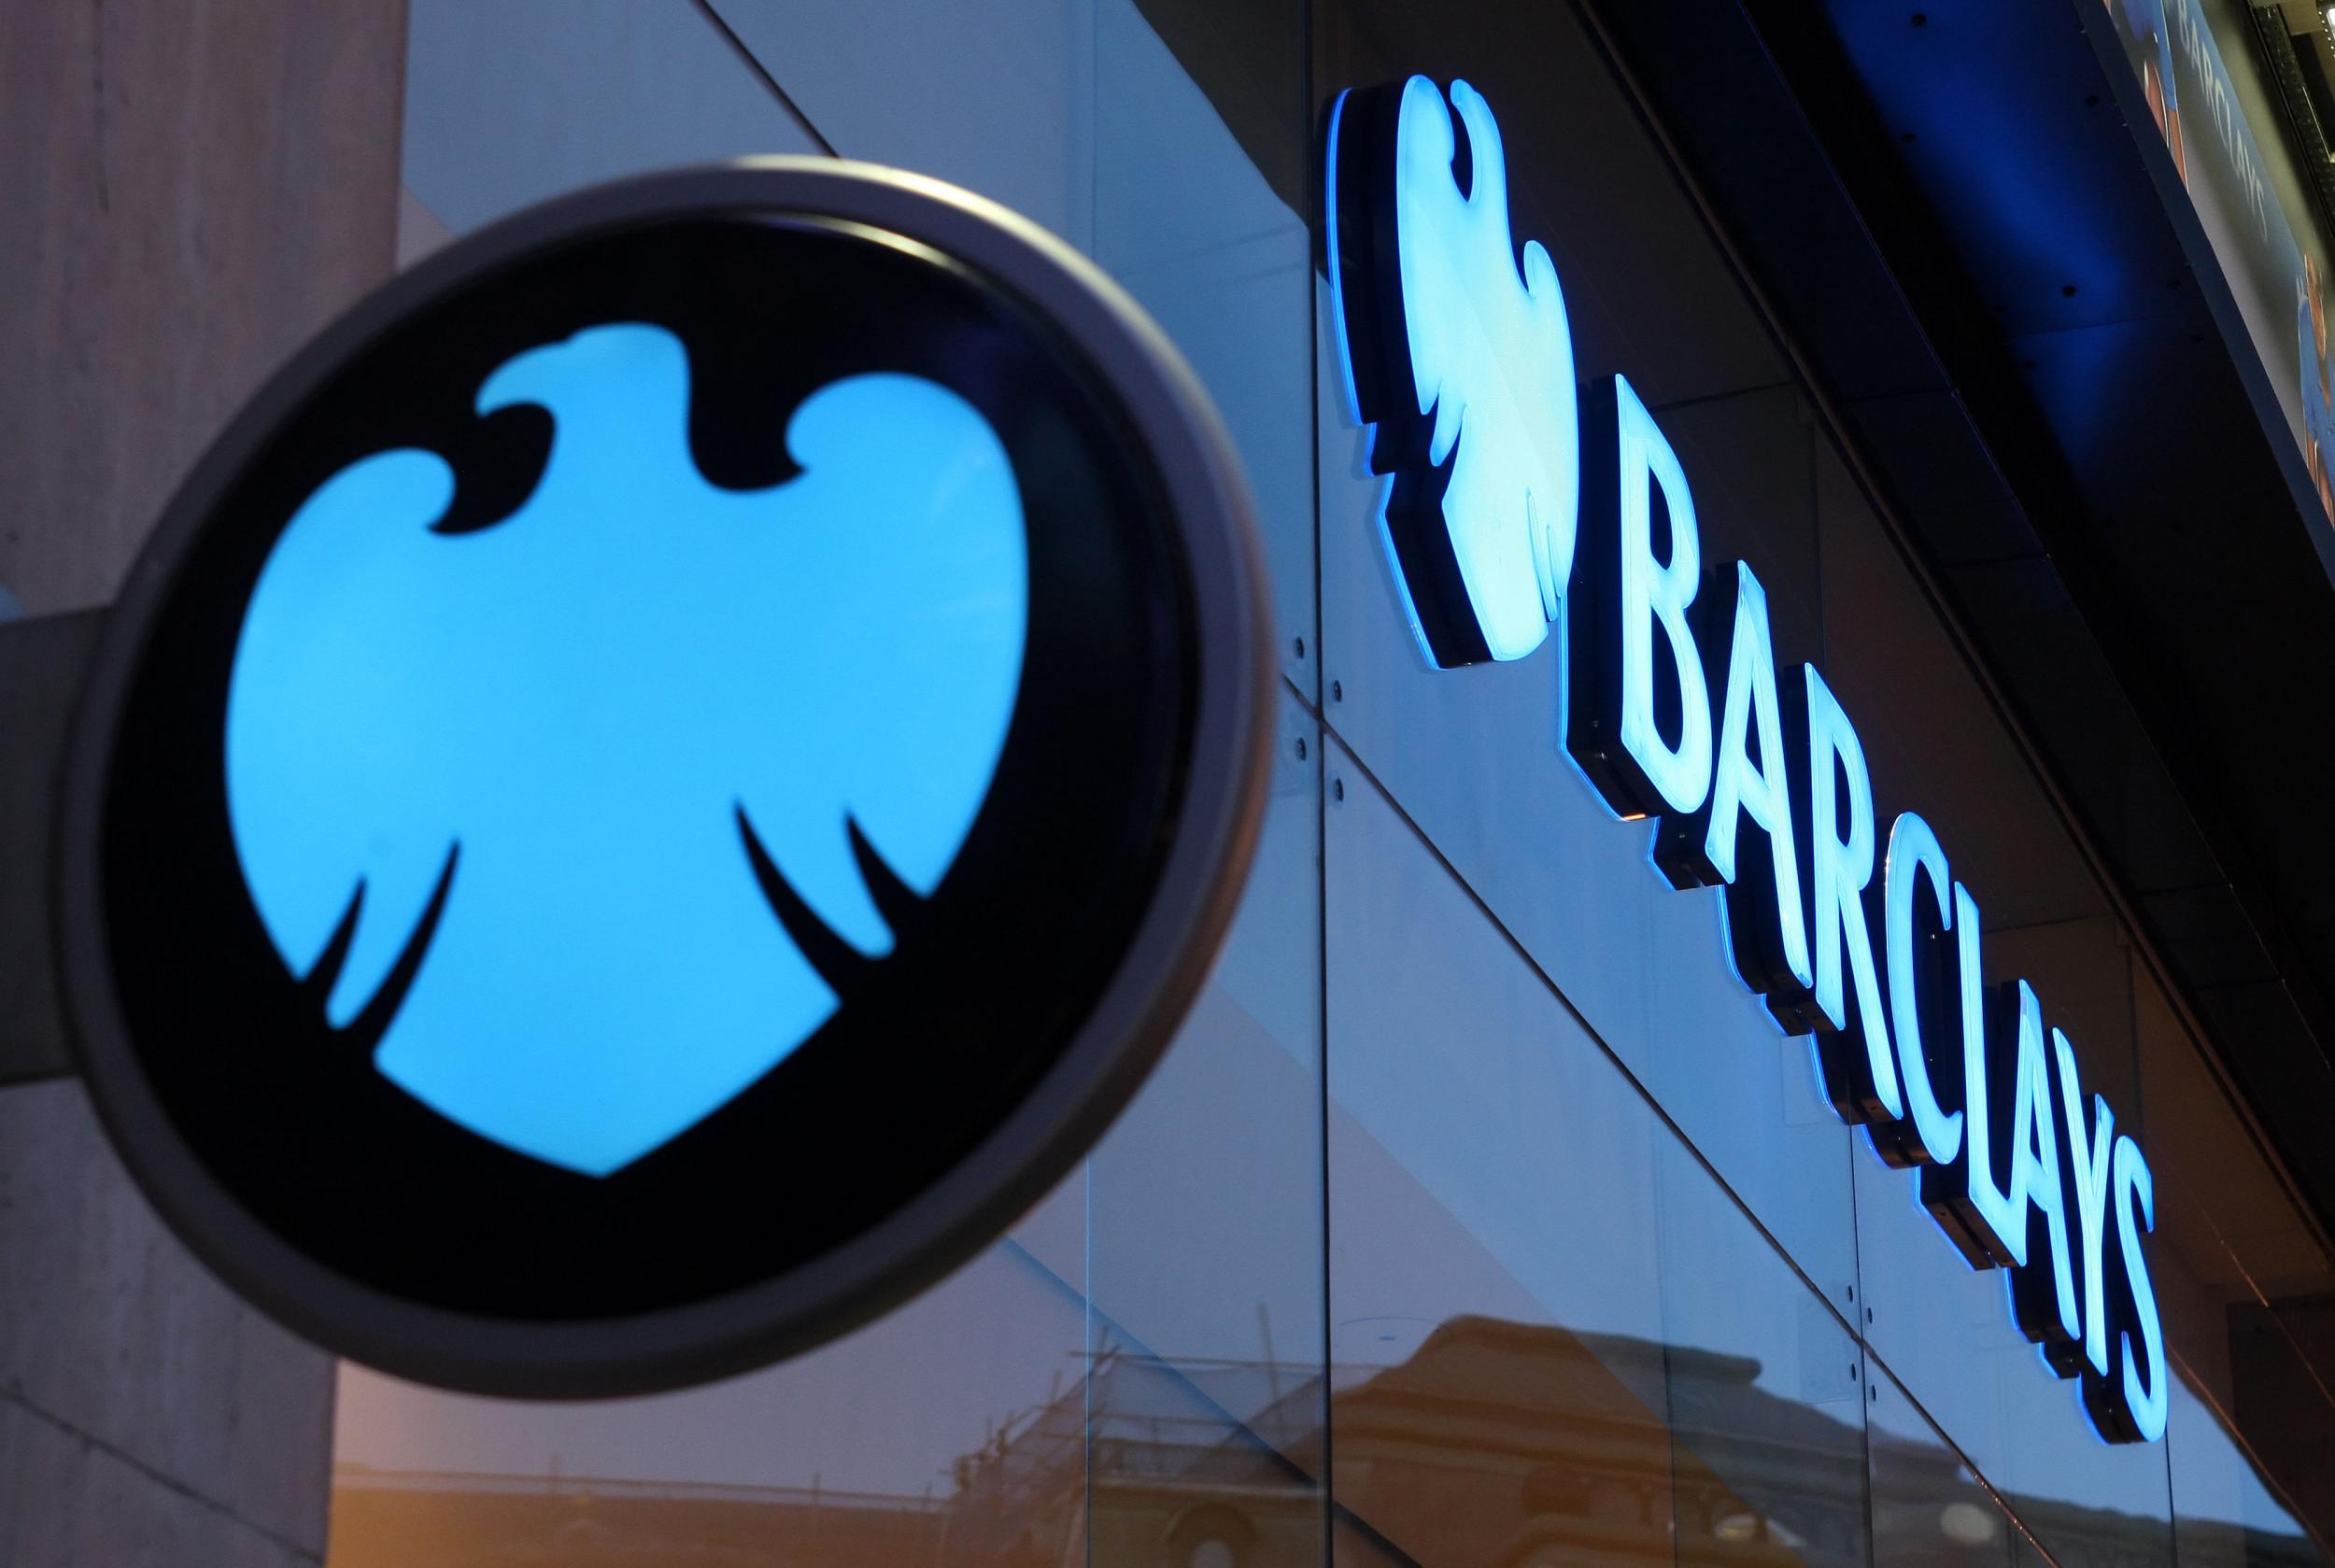 Two former Barclays executives also agreed to pay $2m to resolve claims against them